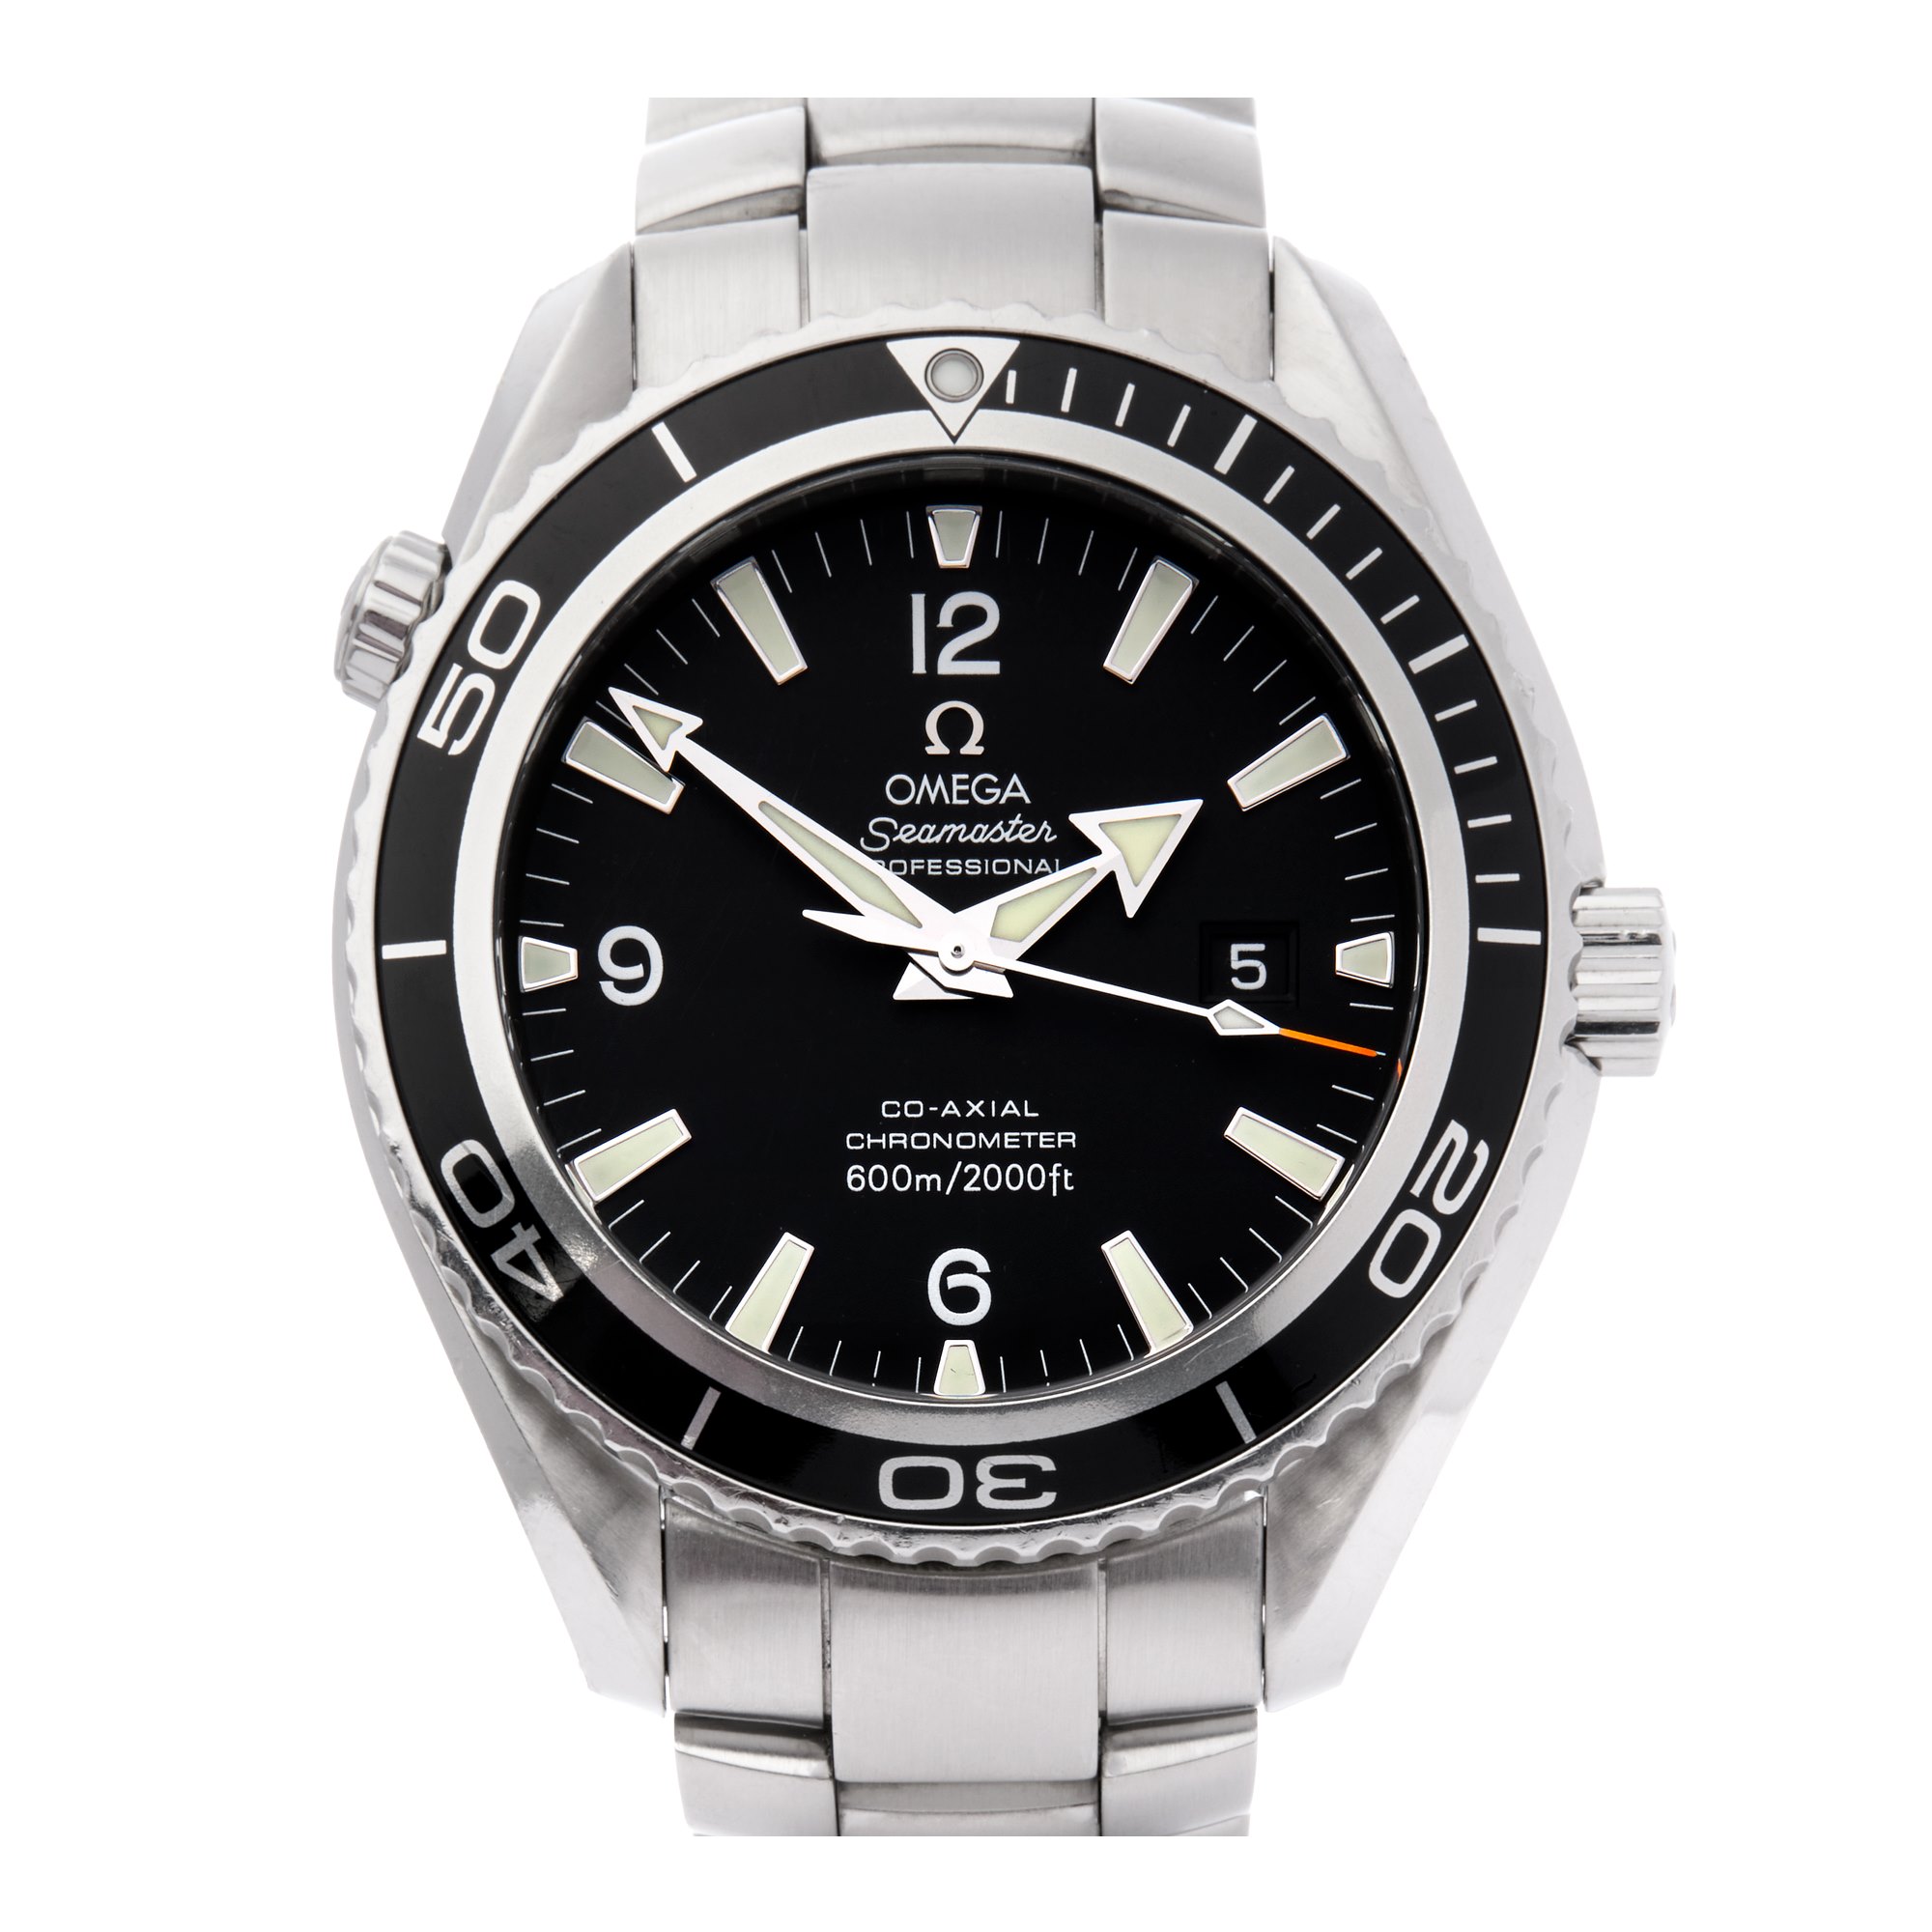 Omega Seamaster Planet Ocean SAS Special Edition Stainless Steel - 22005200 Stainless Steel 22005200